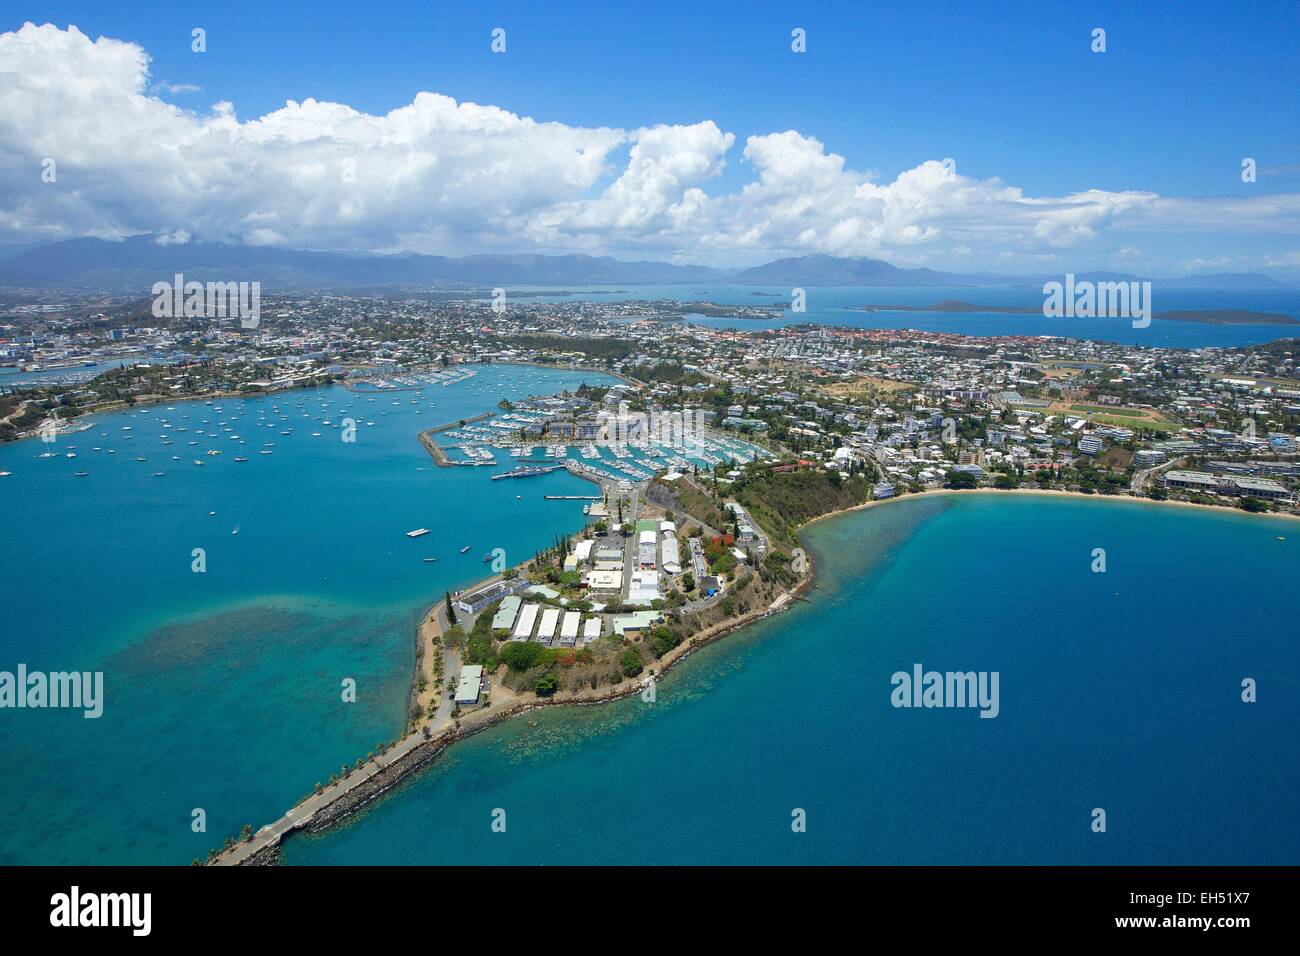 France, New Caledonia, Grande-Terre, Southern Province, Noumea, Bay Orphanage and Lemon Bay (aerial view) Stock Photo